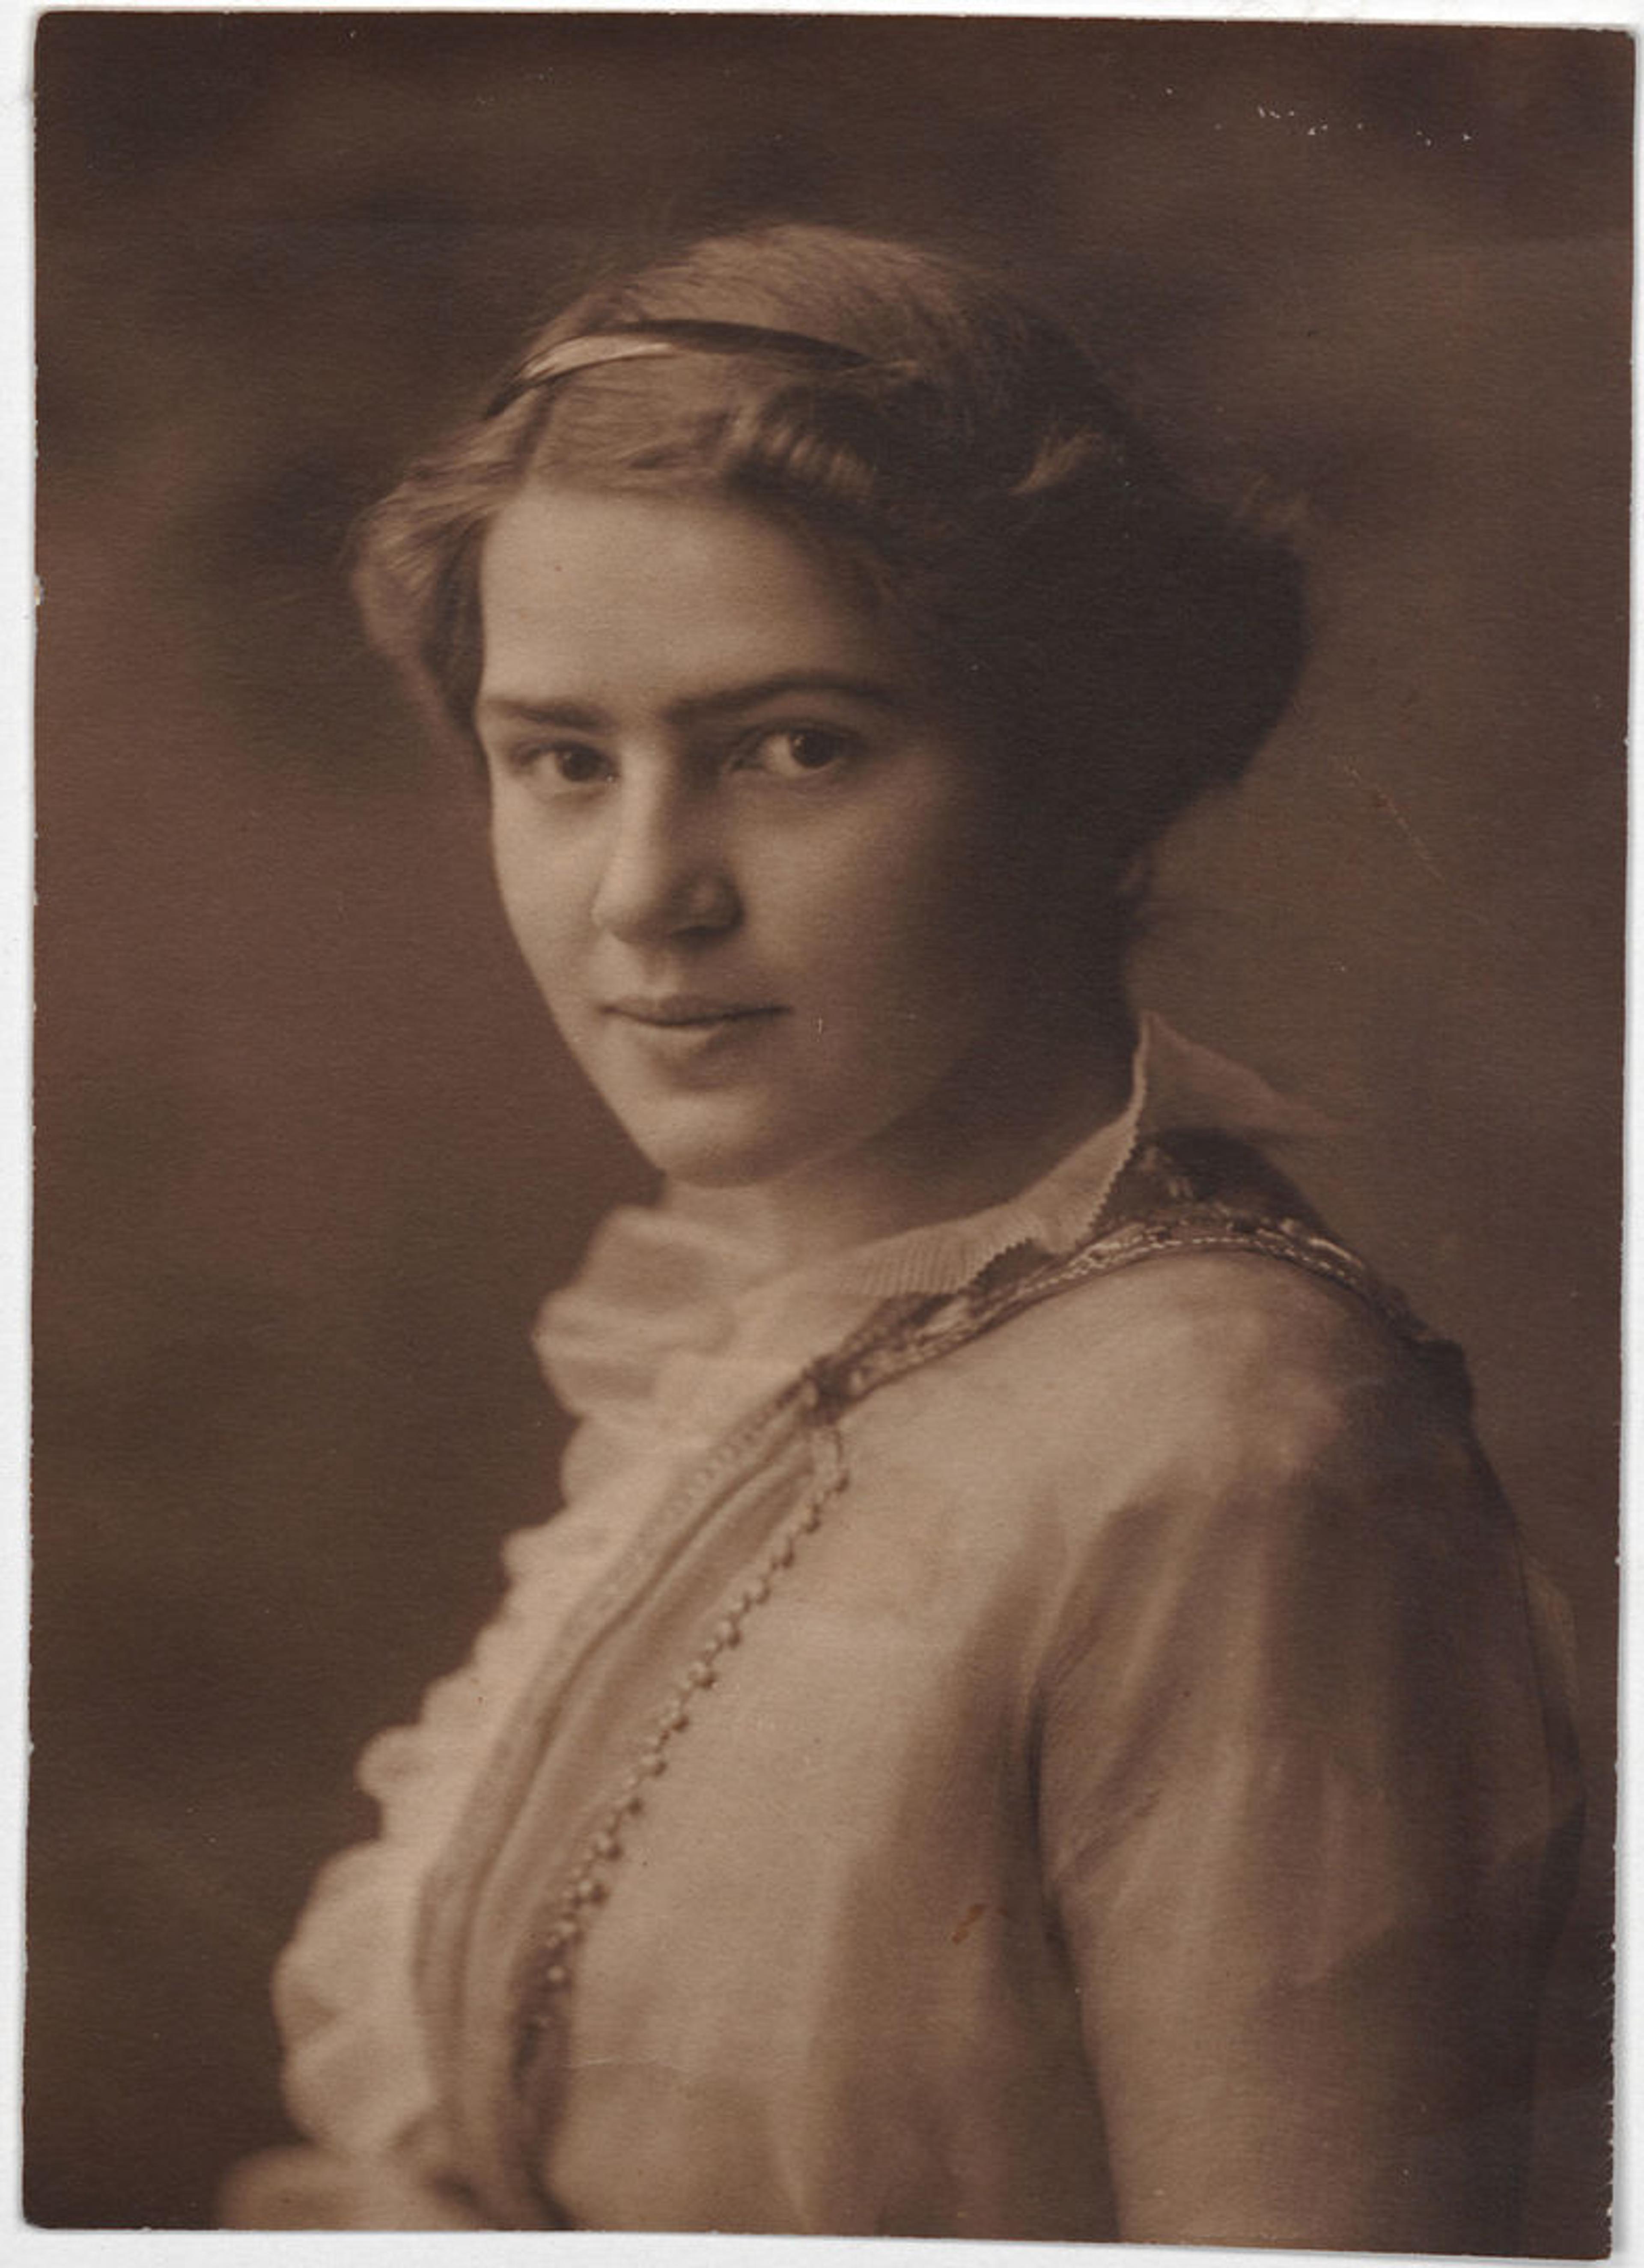 Photograph of Sophie as a young woman, sepia-colored